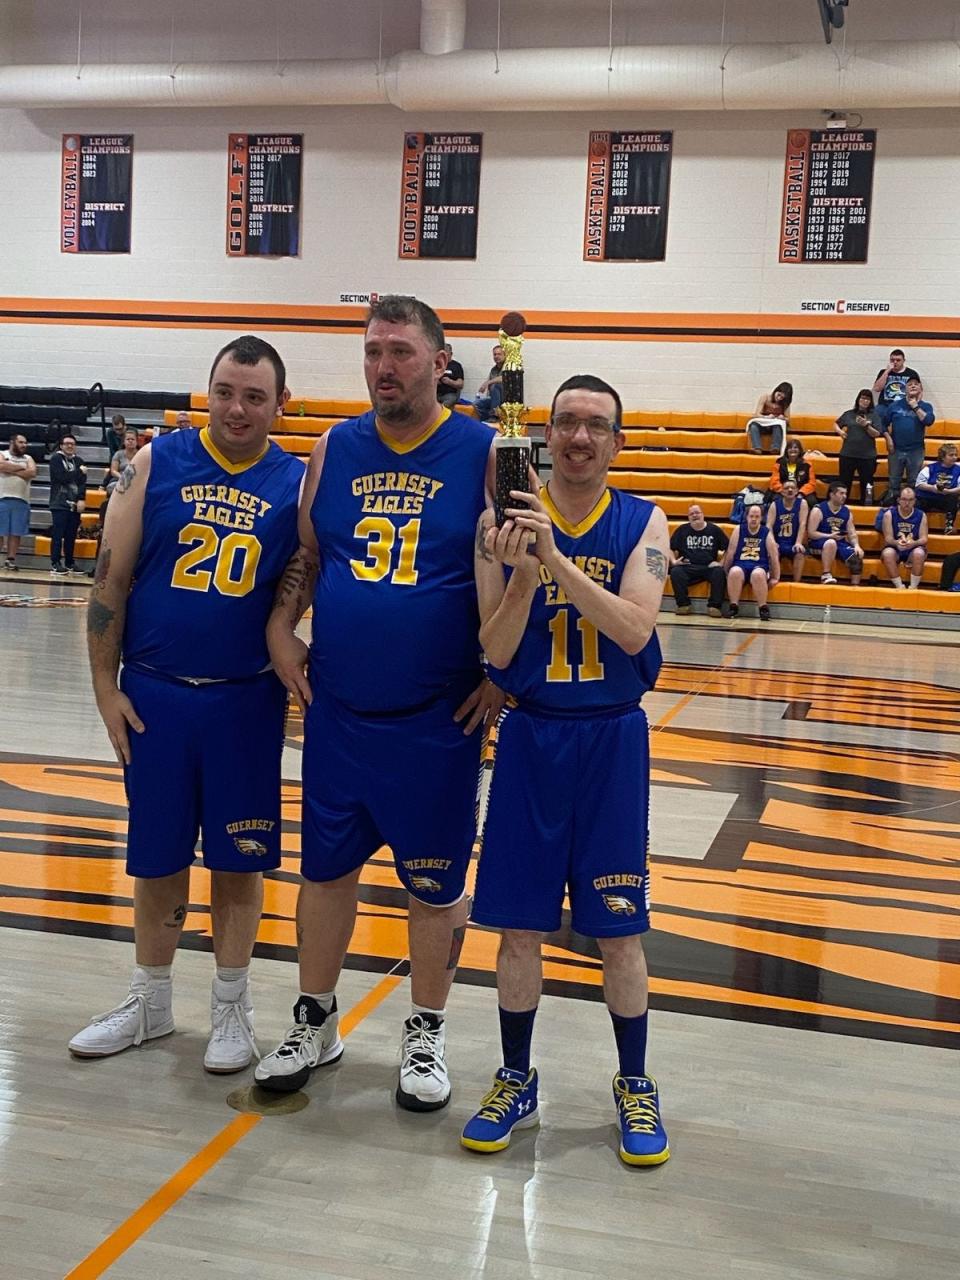 Guernsey Eagles players with their second-place trophy for the 3-on-3 tournament are, from left, DJ Hall, Robert Covington and Jason Hall.